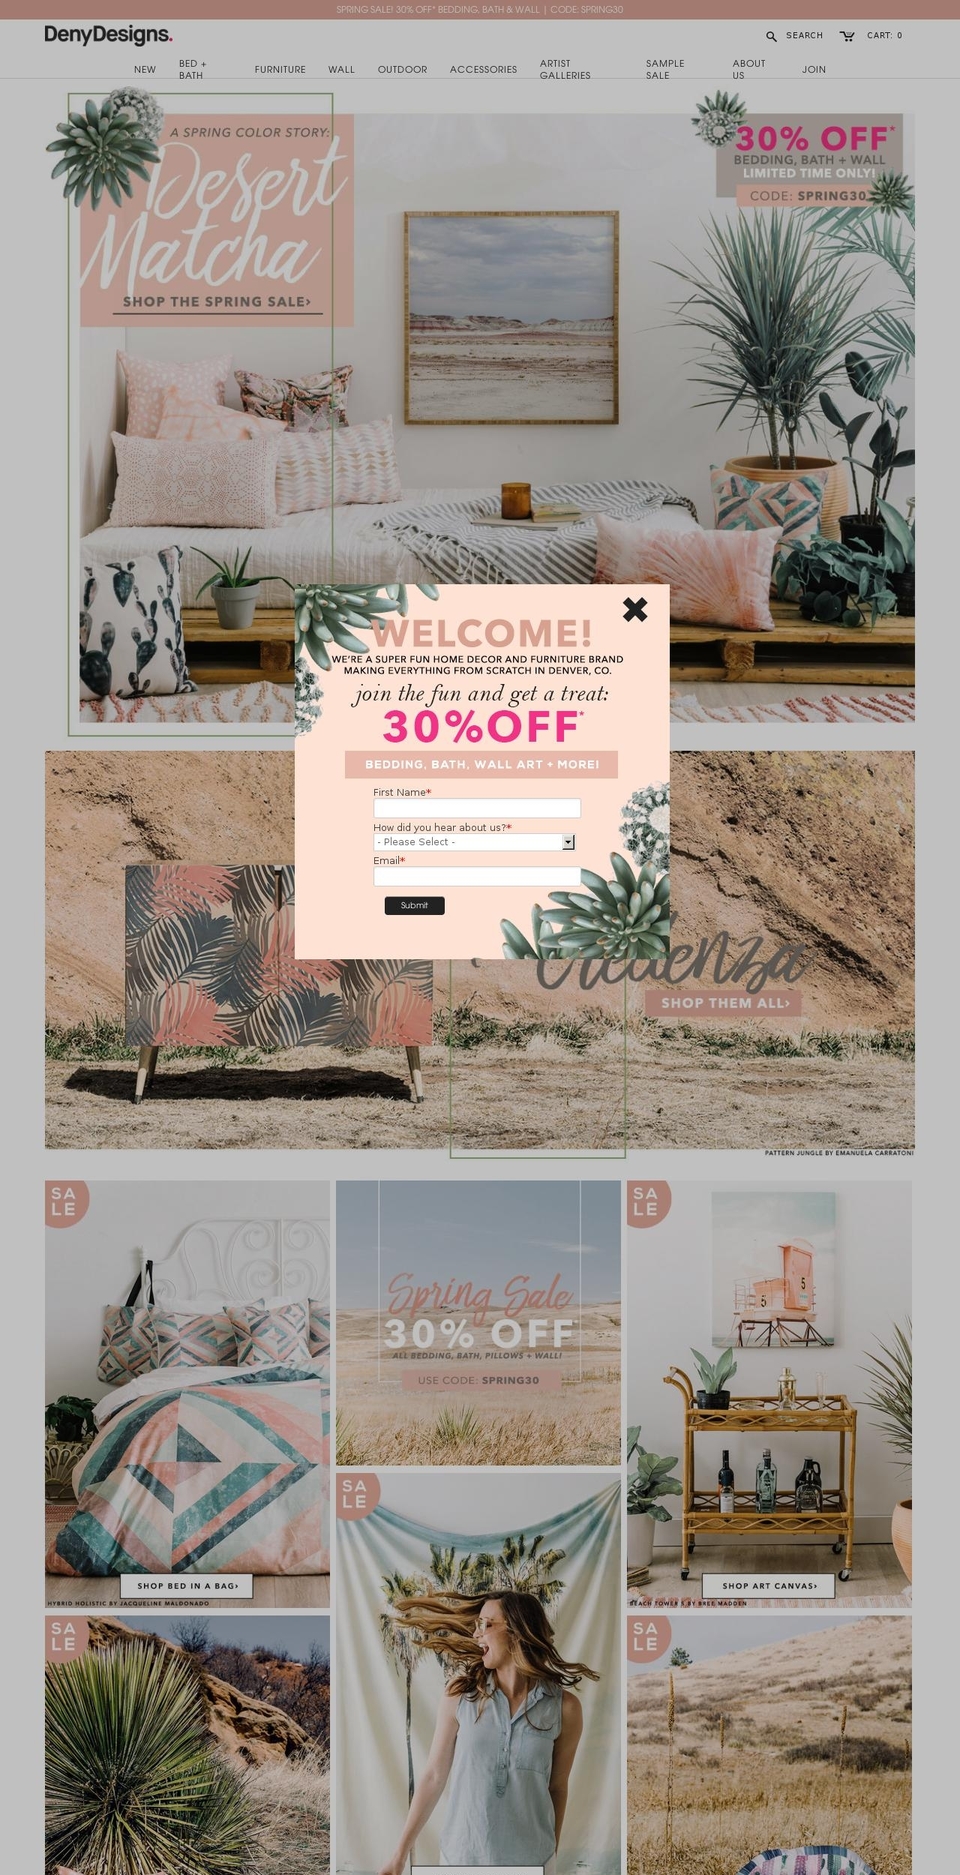 Wholesale Shopify theme site example denydesigns.com